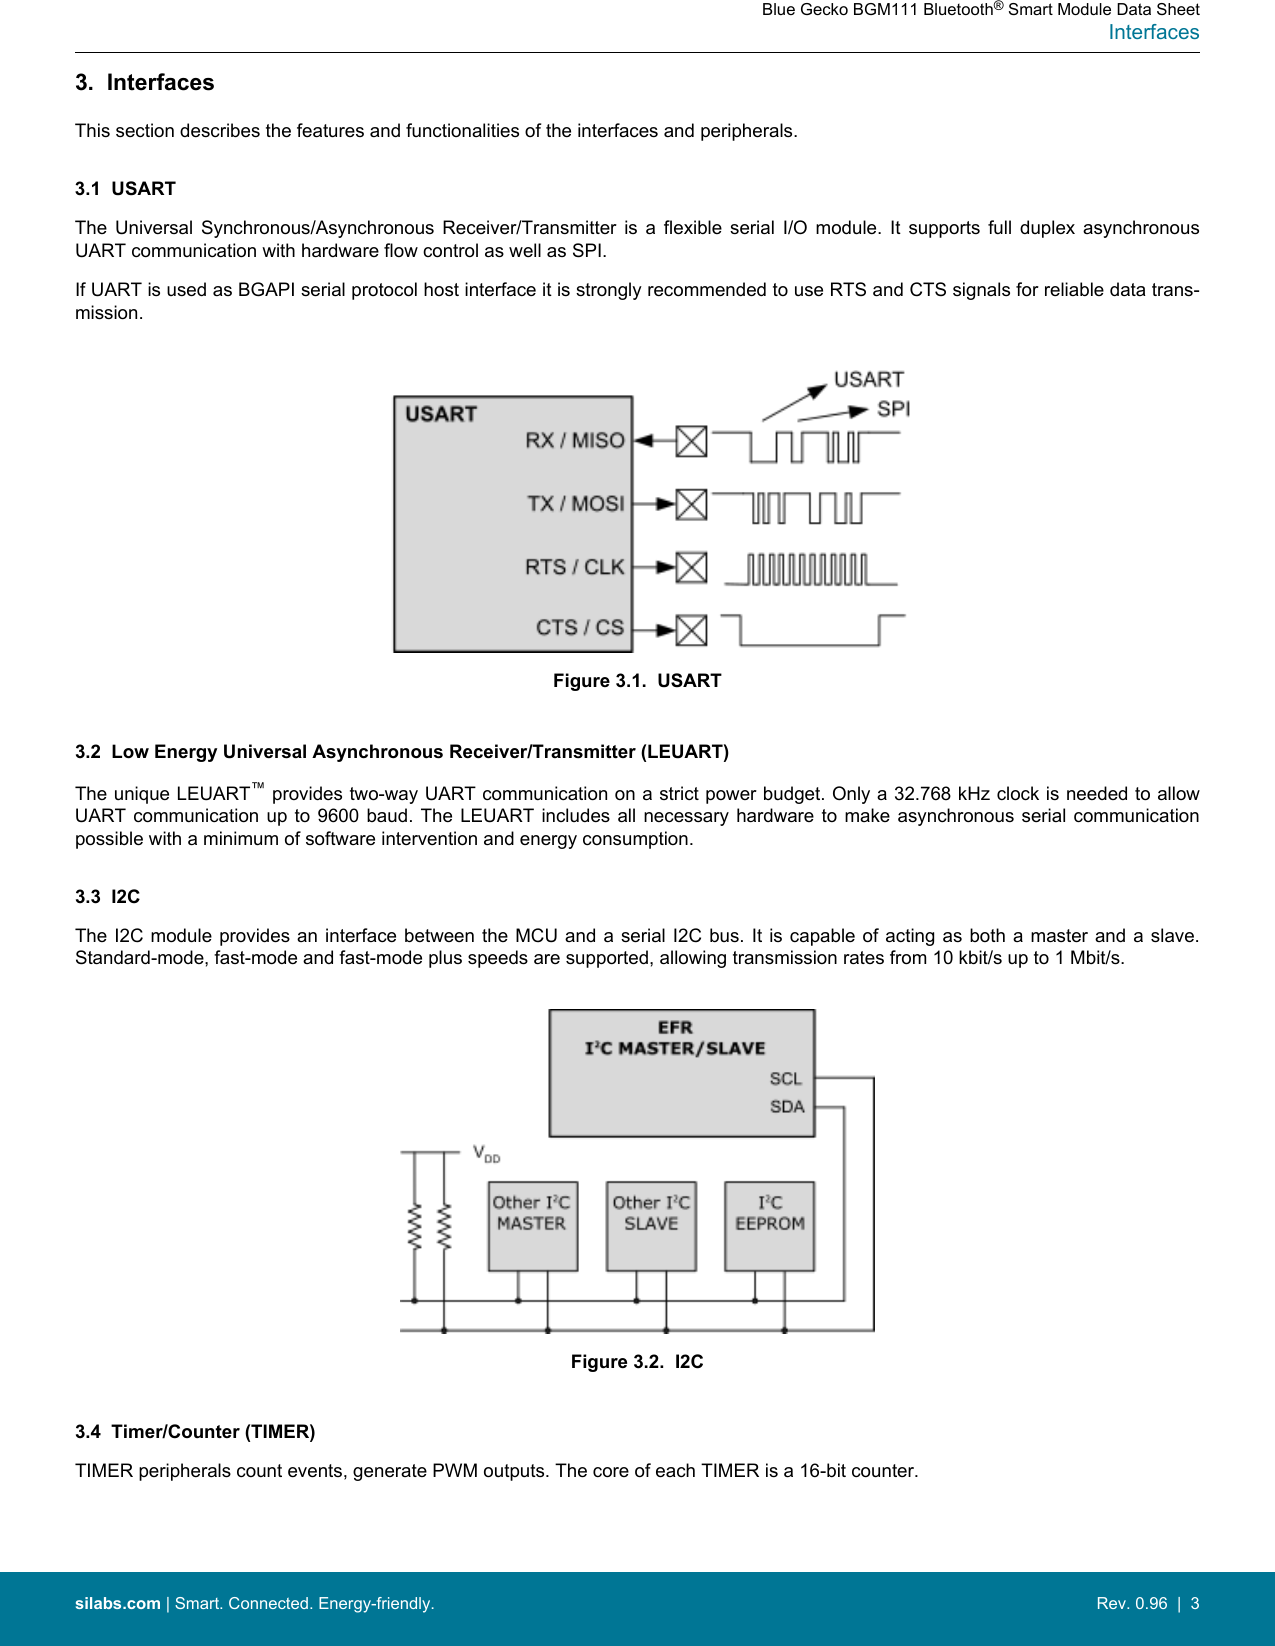 3.  InterfacesThis section describes the features and functionalities of the interfaces and peripherals.3.1  USARTThe  Universal  Synchronous/Asynchronous  Receiver/Transmitter  is  a  flexible  serial  I/O  module.  It  supports  full  duplex  asynchronousUART communication with hardware flow control as well as SPI.If UART is used as BGAPI serial protocol host interface it is strongly recommended to use RTS and CTS signals for reliable data trans-mission.Figure 3.1.  USART3.2  Low Energy Universal Asynchronous Receiver/Transmitter (LEUART)The unique LEUART™ provides two-way UART communication on a strict power budget. Only a 32.768 kHz clock is needed to allowUART communication  up  to 9600 baud.  The LEUART includes all  necessary hardware to  make  asynchronous serial communicationpossible with a minimum of software intervention and energy consumption.3.3  I2CThe I2C module provides an interface  between  the MCU  and a serial I2C bus. It is capable of  acting  as  both a master and a slave.Standard-mode, fast-mode and fast-mode plus speeds are supported, allowing transmission rates from 10 kbit/s up to 1 Mbit/s.Figure 3.2.  I2C3.4  Timer/Counter (TIMER)TIMER peripherals count events, generate PWM outputs. The core of each TIMER is a 16-bit counter.Blue Gecko BGM111 Bluetooth® Smart Module Data SheetInterfacessilabs.com | Smart. Connected. Energy-friendly. Rev. 0.96  |  3